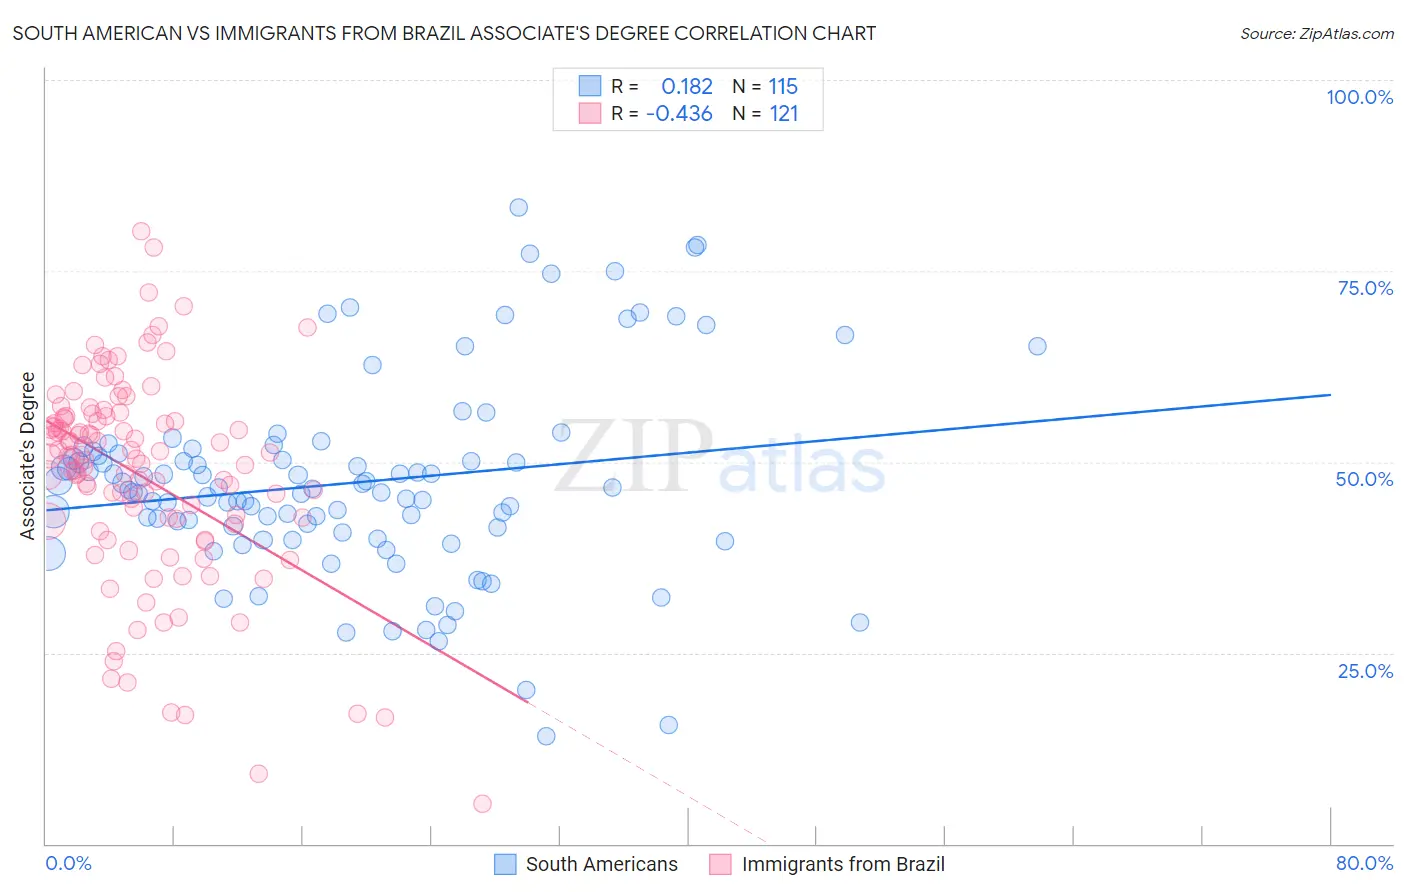 South American vs Immigrants from Brazil Associate's Degree